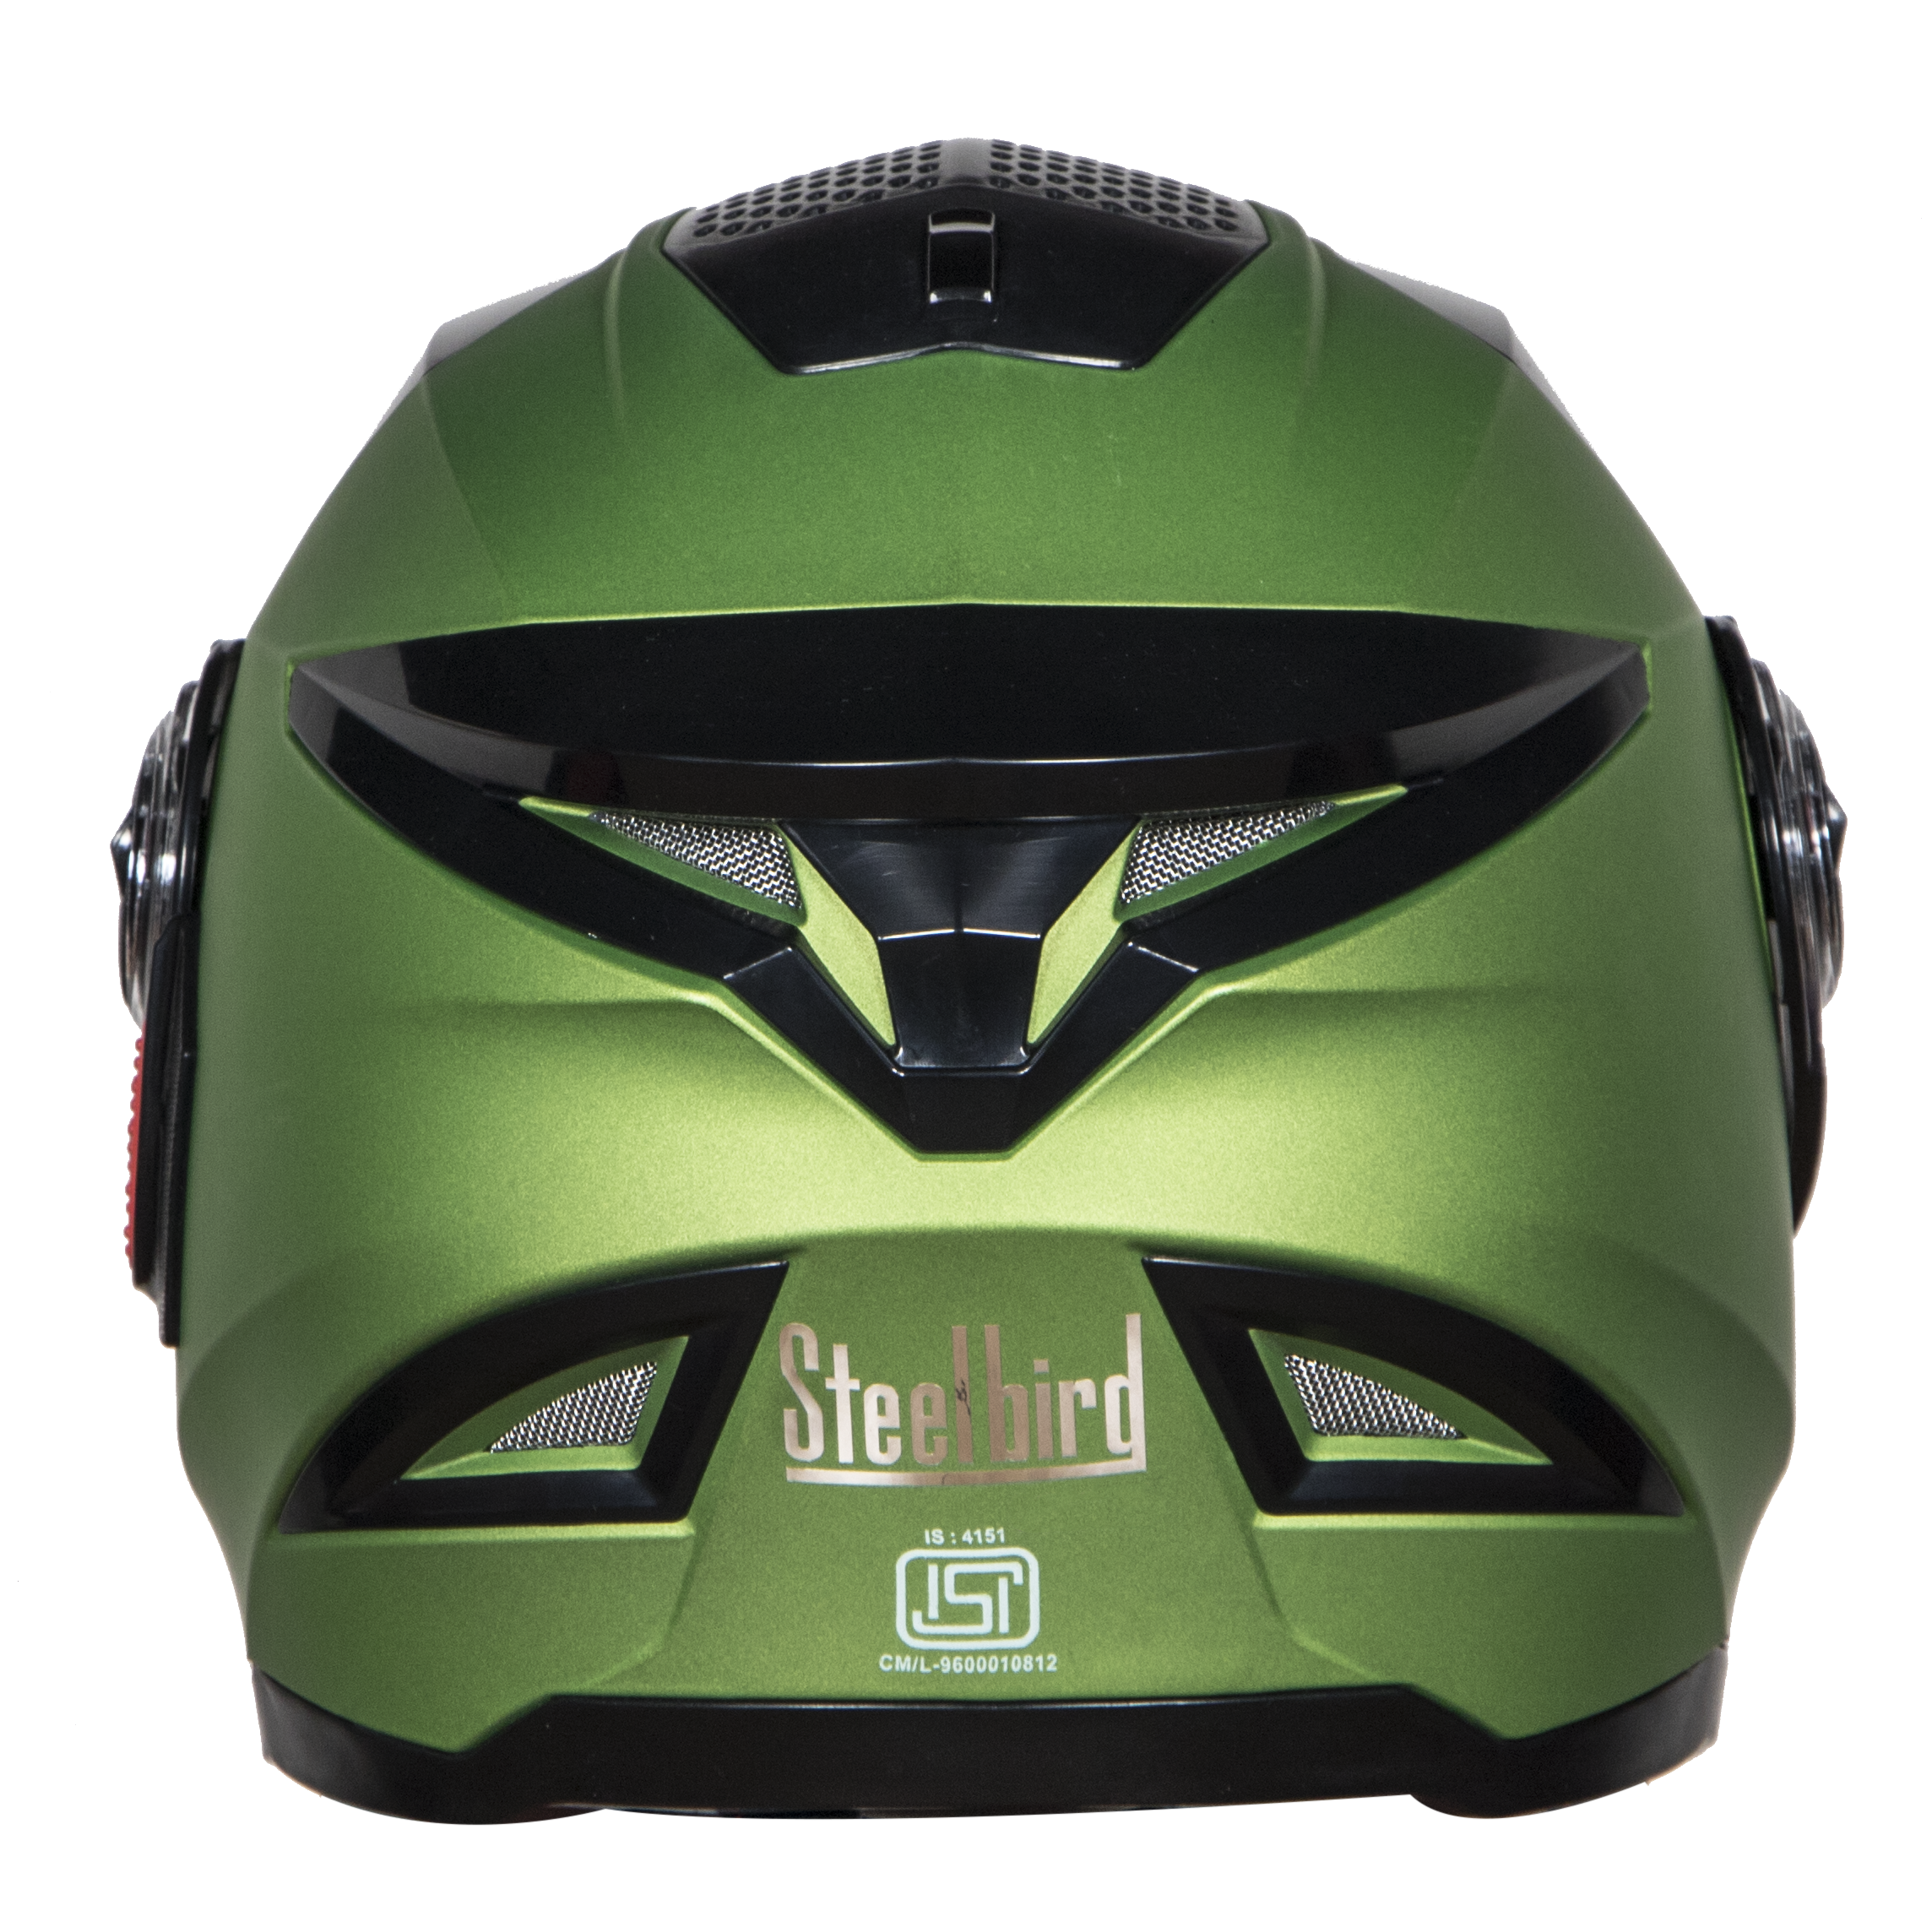 SBH-17 OPT MAT Y.GREEN WITH CHROME RAINBOW VISOR (WITH EXTRA FREE CABLE LOCK AND CLEAR VISOR)